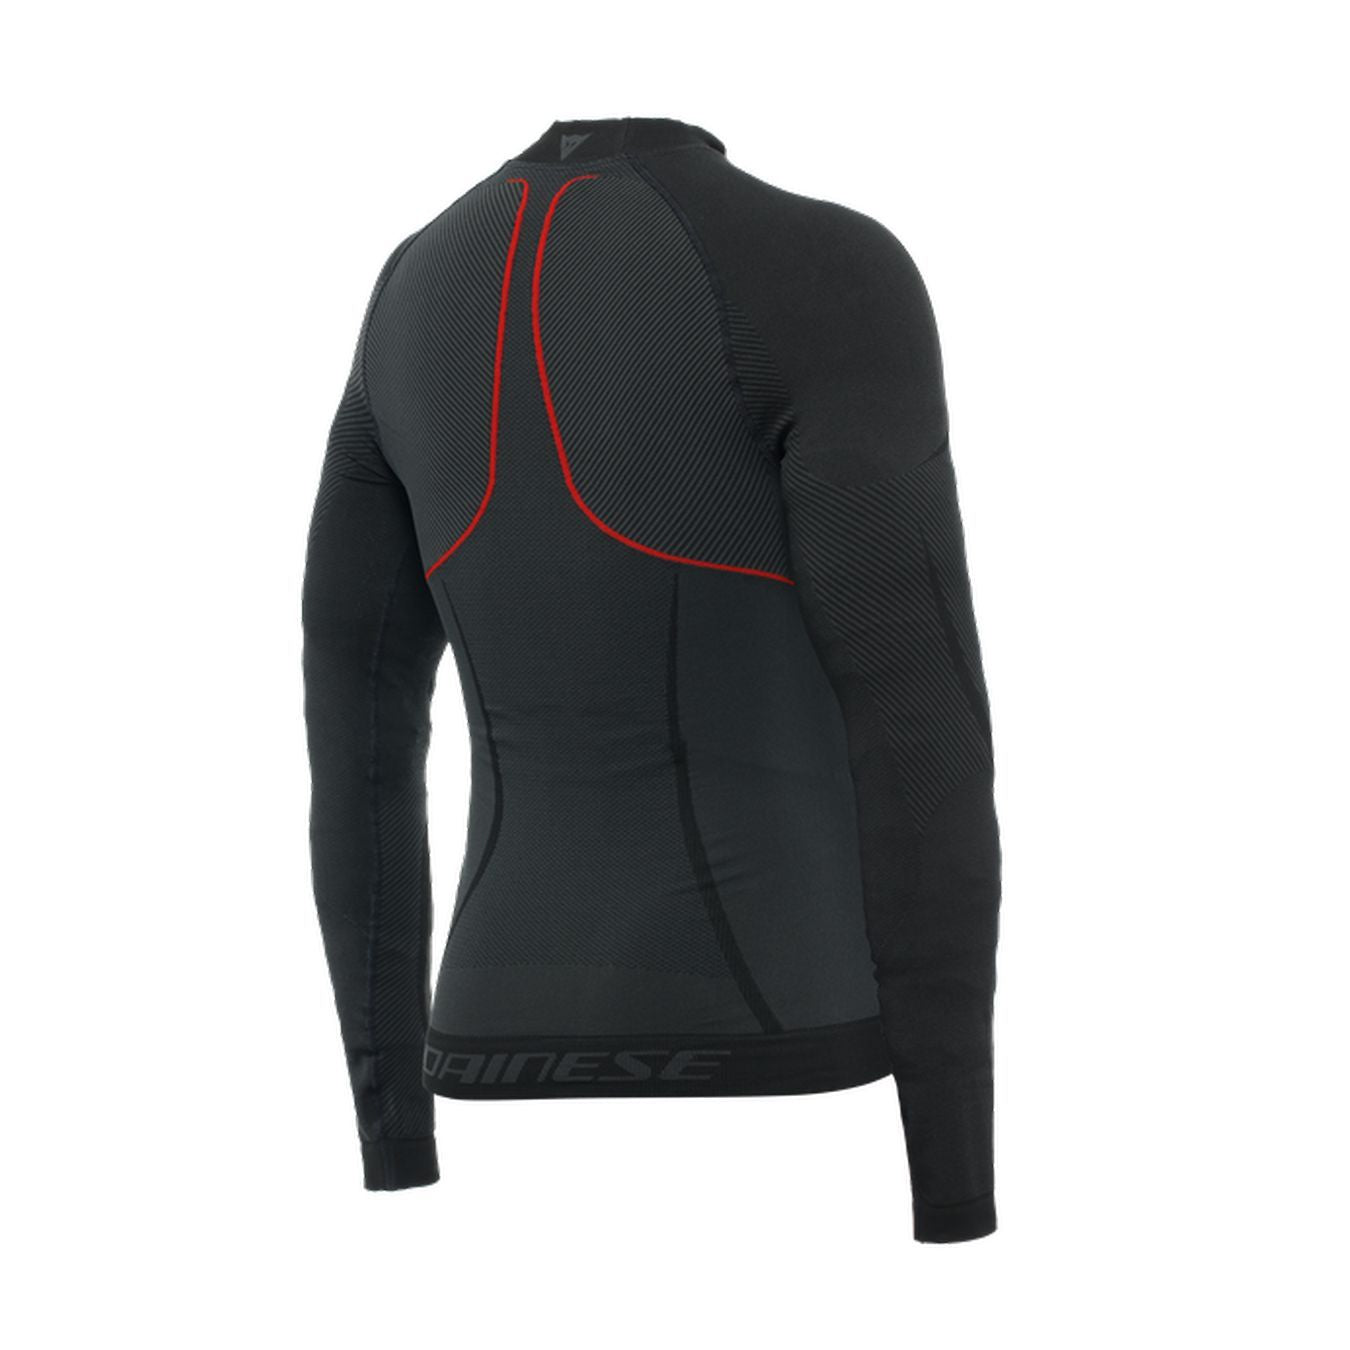 Maglia Termica Dainese Thermo Ls Black/red